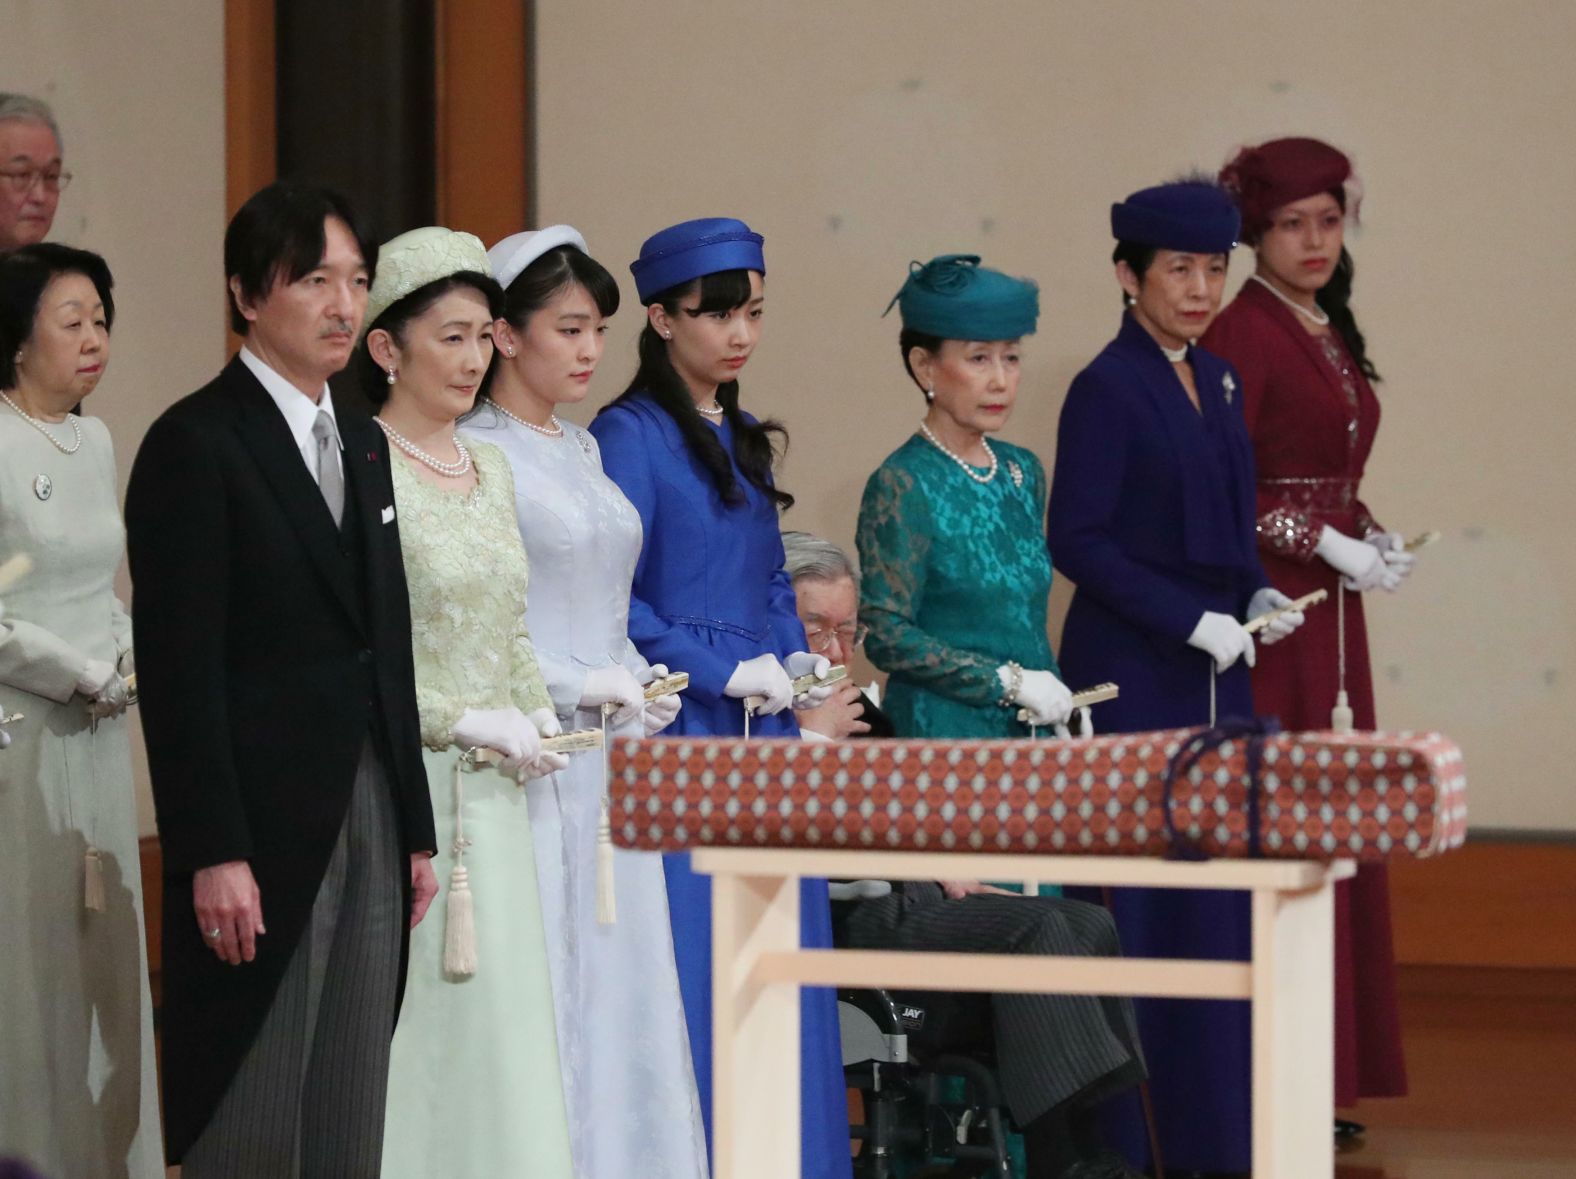 Members of the royal family attend the abdication ceremony. At left is Akihito's youngest son, Fumihito. He is joined by his wife, Kiko, and their daughters, Mako and Kako.